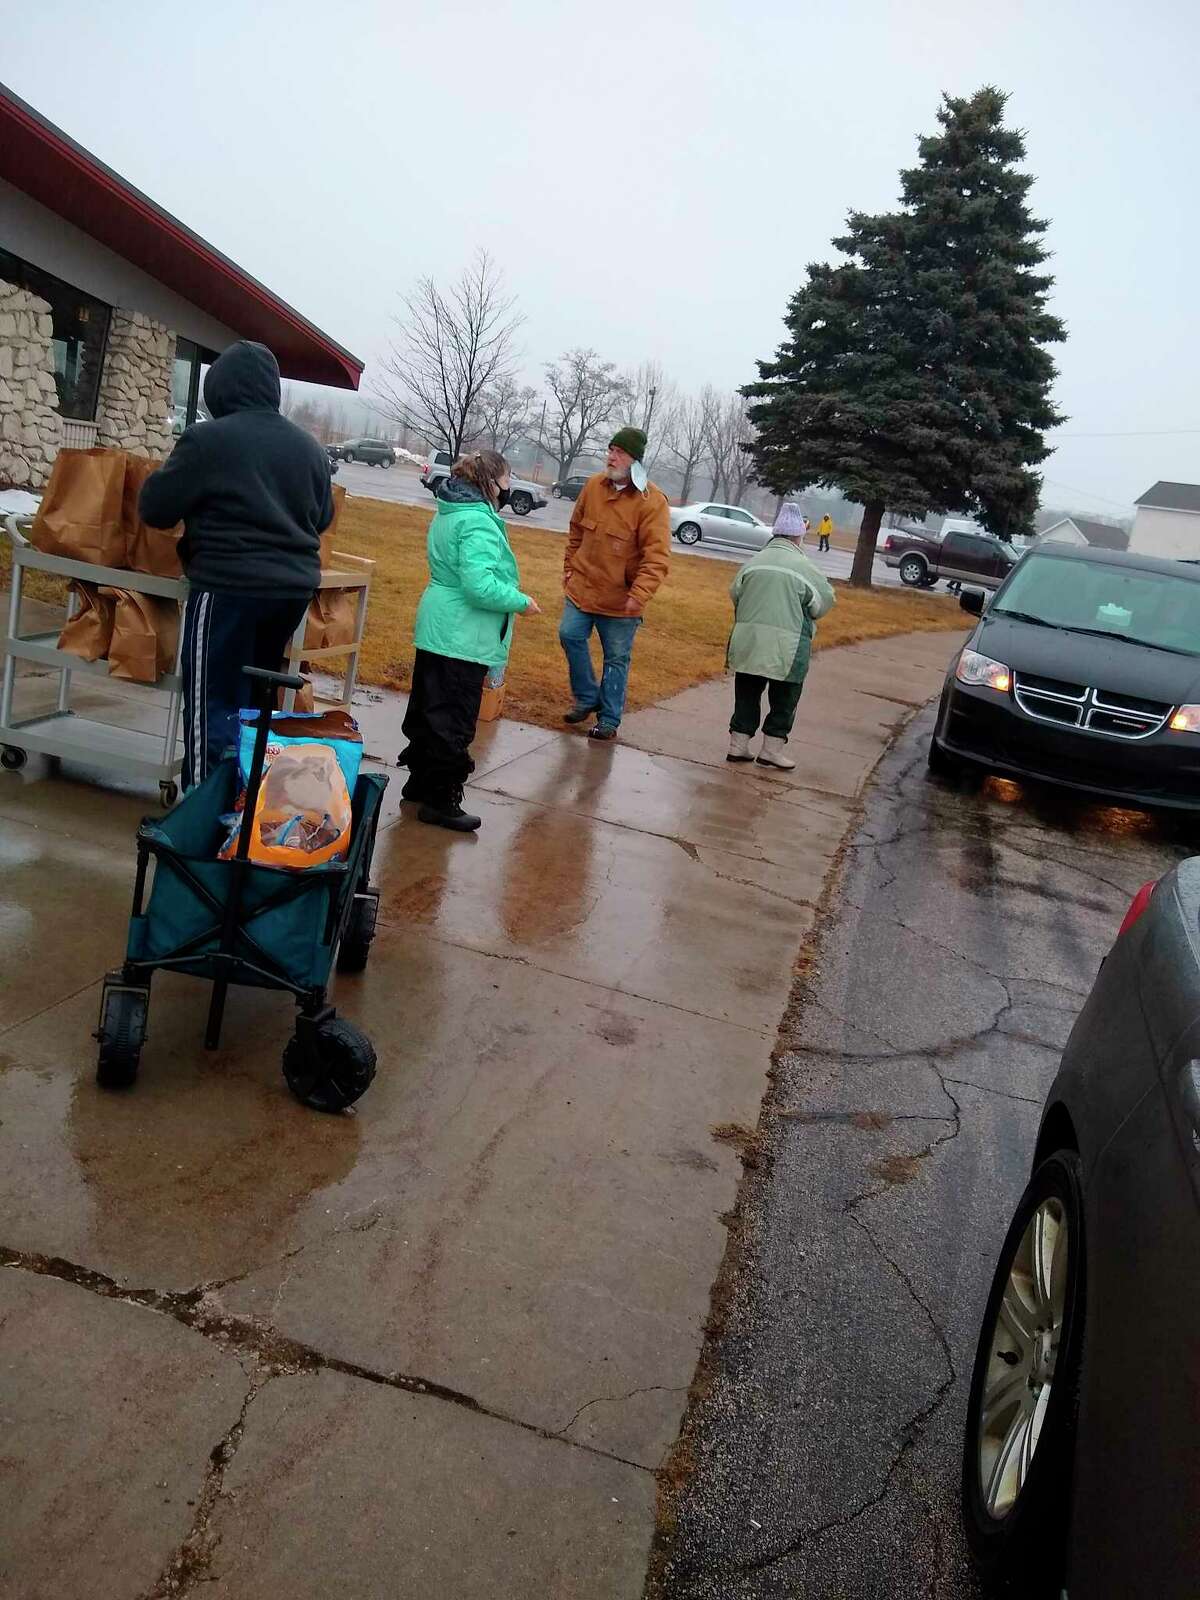 Volunteers distribute bags of essentials at the food pantry held Friday. (Courtesy Photo/Jeanne Barber)